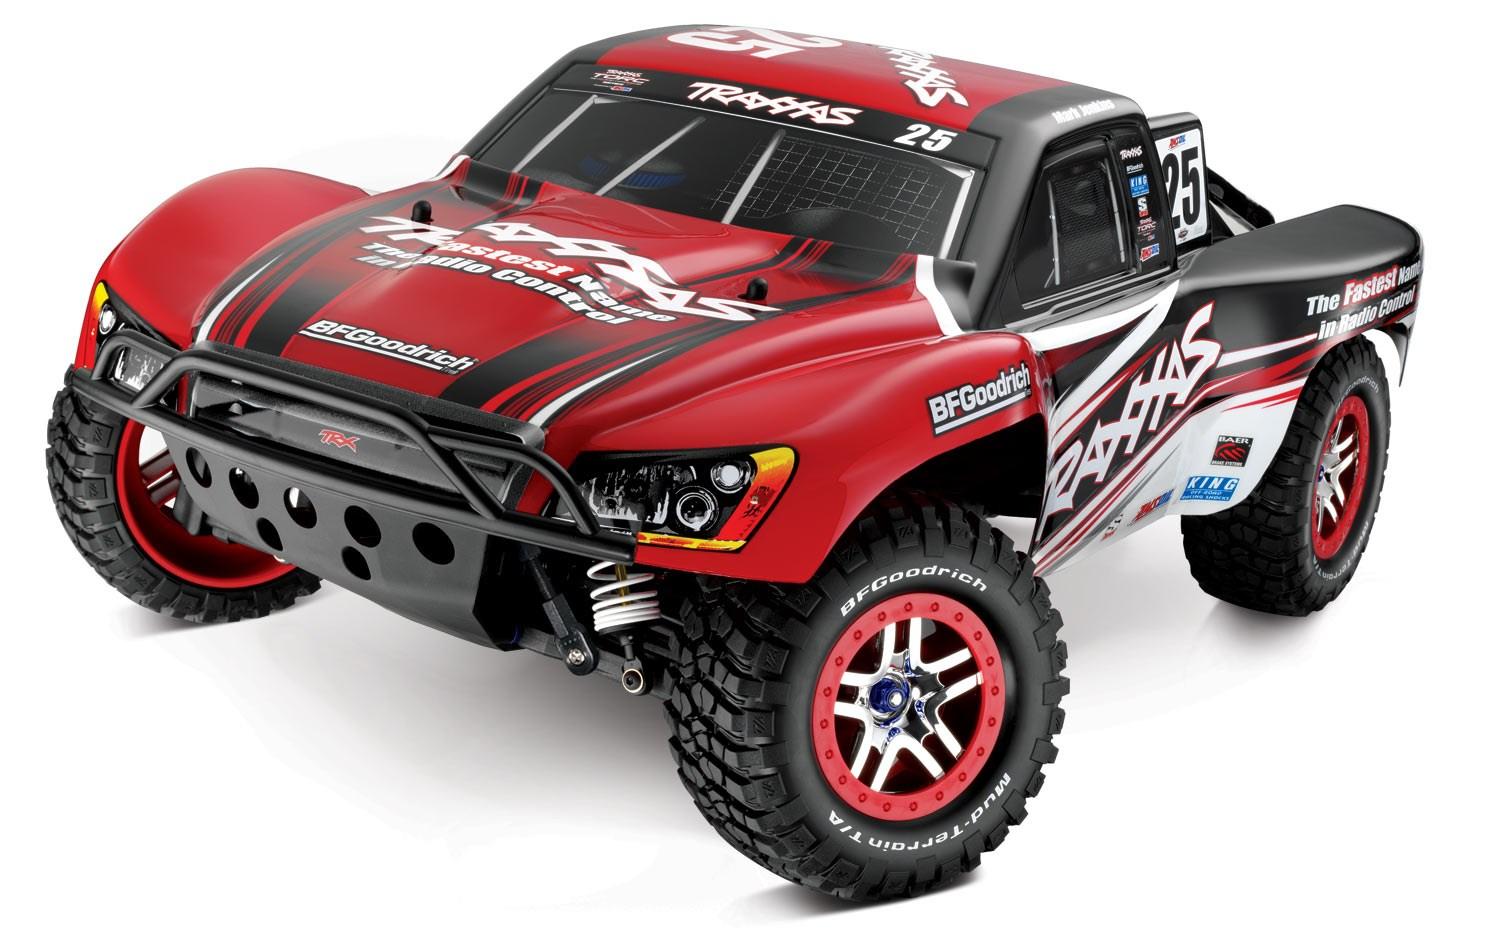 Foto Traxxas 6807 Slash Ultimate VXL Brushless 4WD 2.4GHz RTR modelismo coches rc (Rojo)